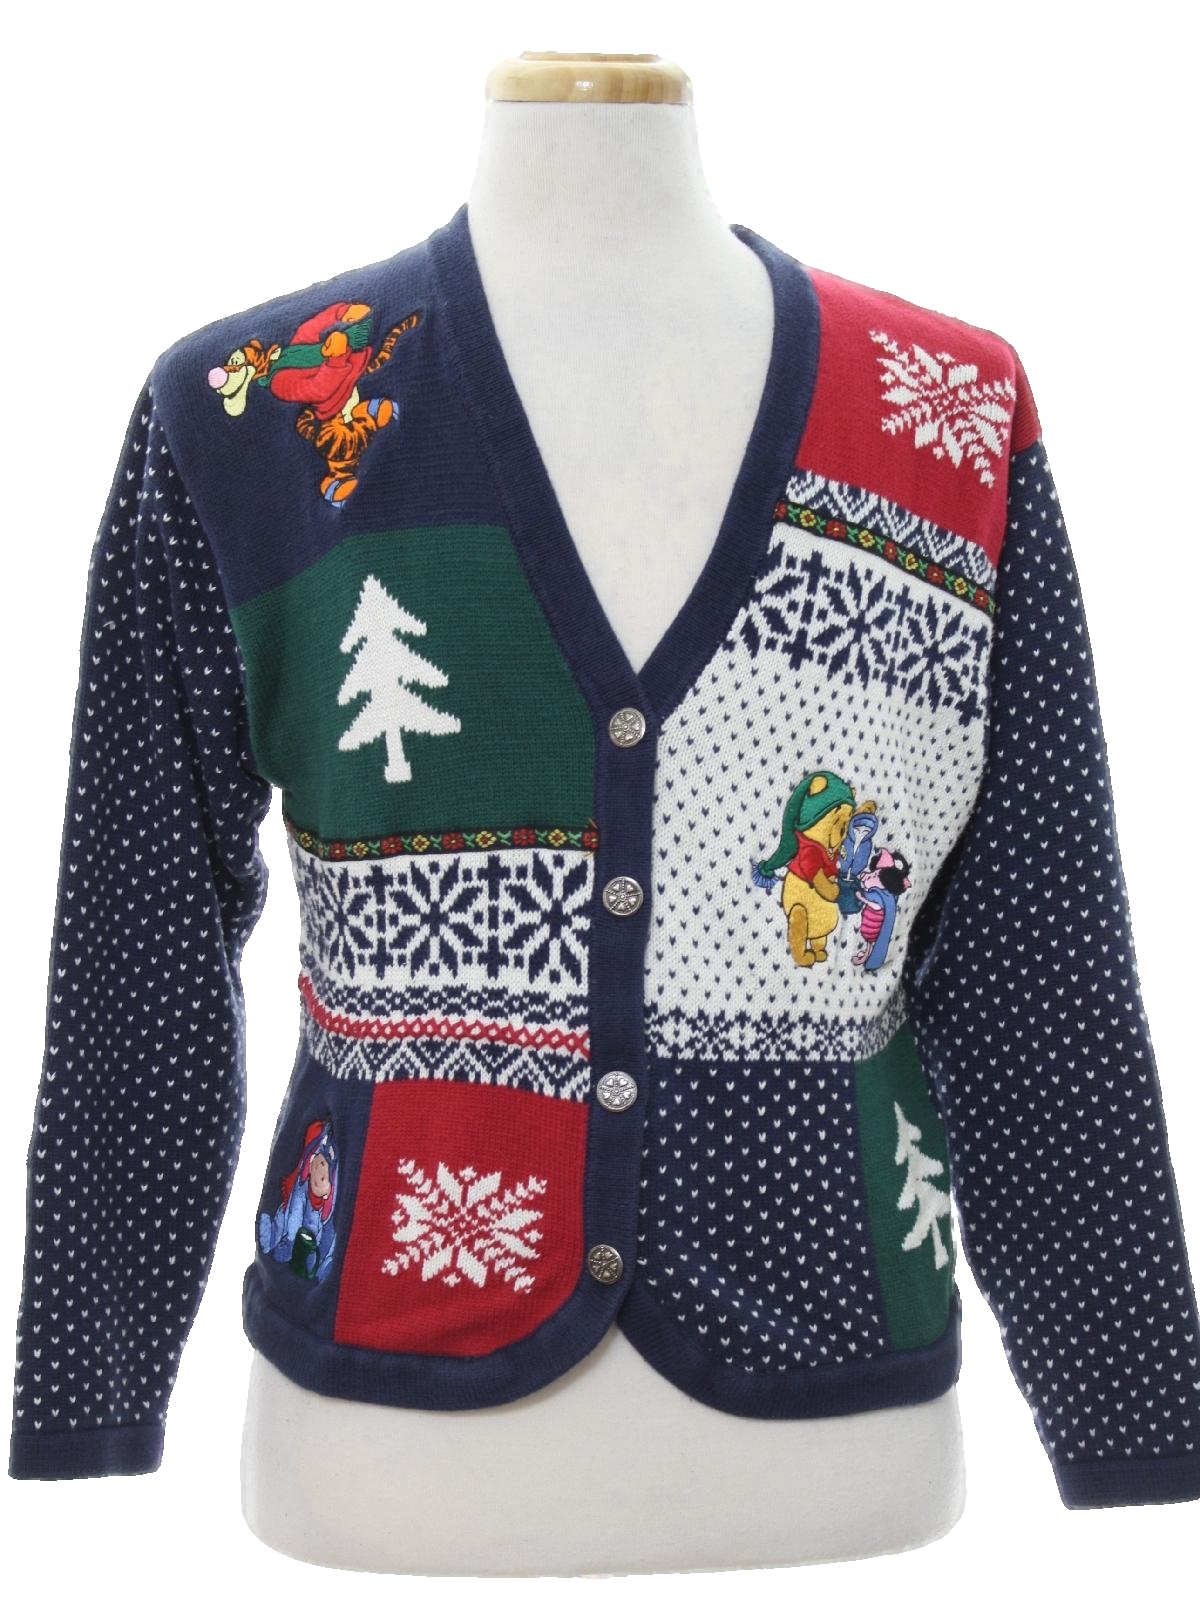 Womens Ugly Christmas Cardigan Sweater The Disney Store